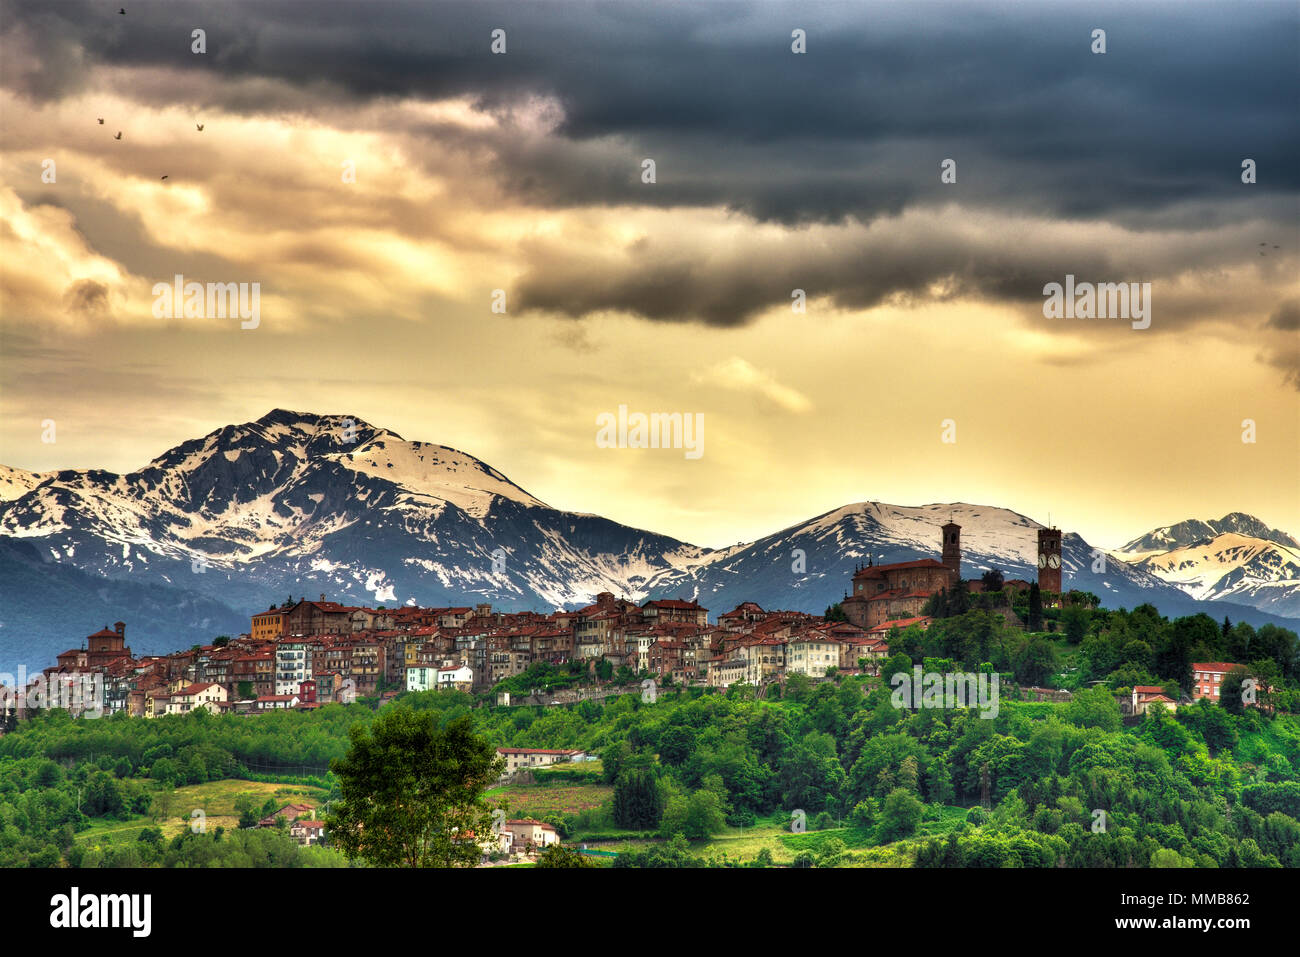 View of the upper and oldest part (Piazza) of the town of Mondovì, with the background of the Alps. Mondovì, Cuneo province, Piedmont, North Italy. Stock Photo